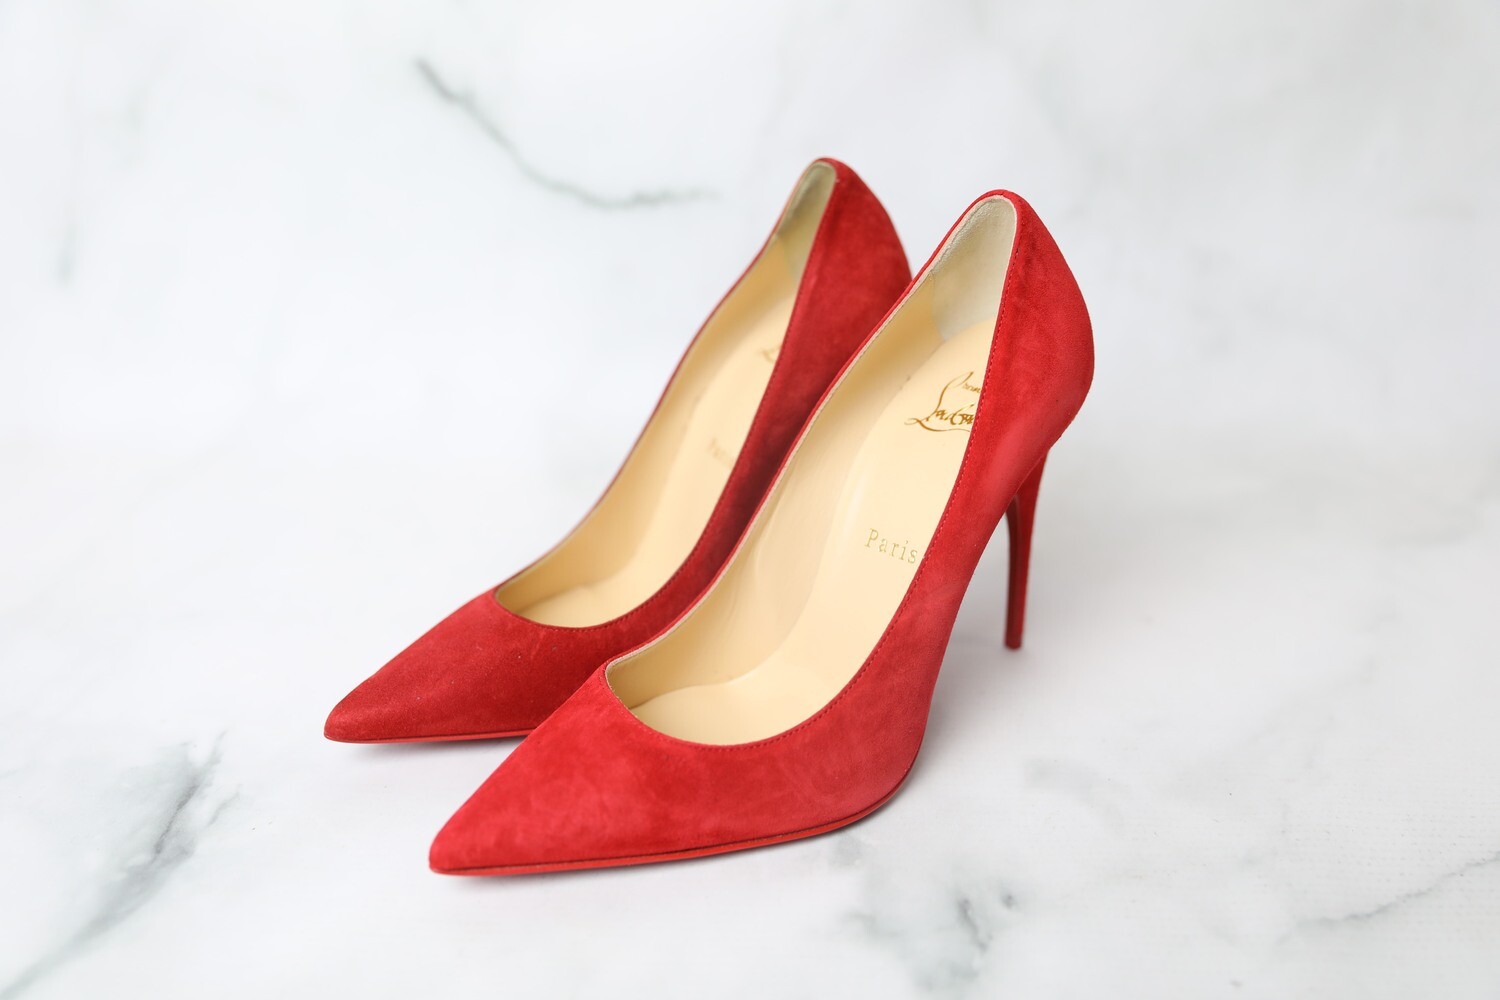 Christian Louboutin Shoes Alminette 100mm Red Suede Leather Point-toe  Classic Stiletto Heel Pumps Heels, New in Box WA001 - Julia Rose Boston